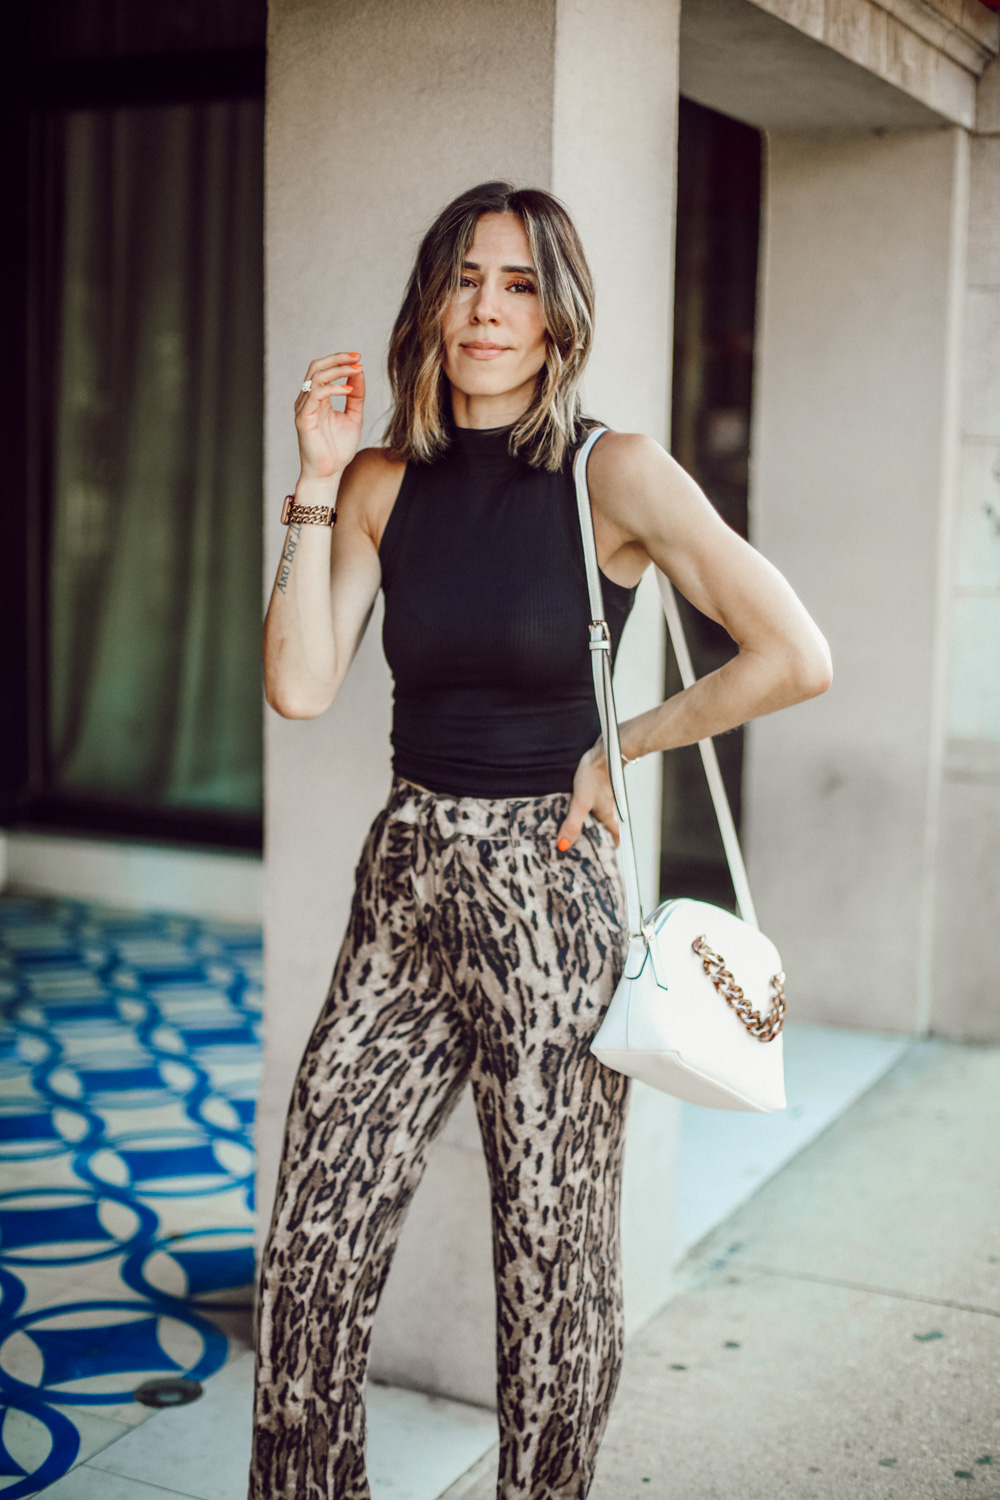 How to Style a Look for Work to Happy Hour | Seattle Fashion Blog